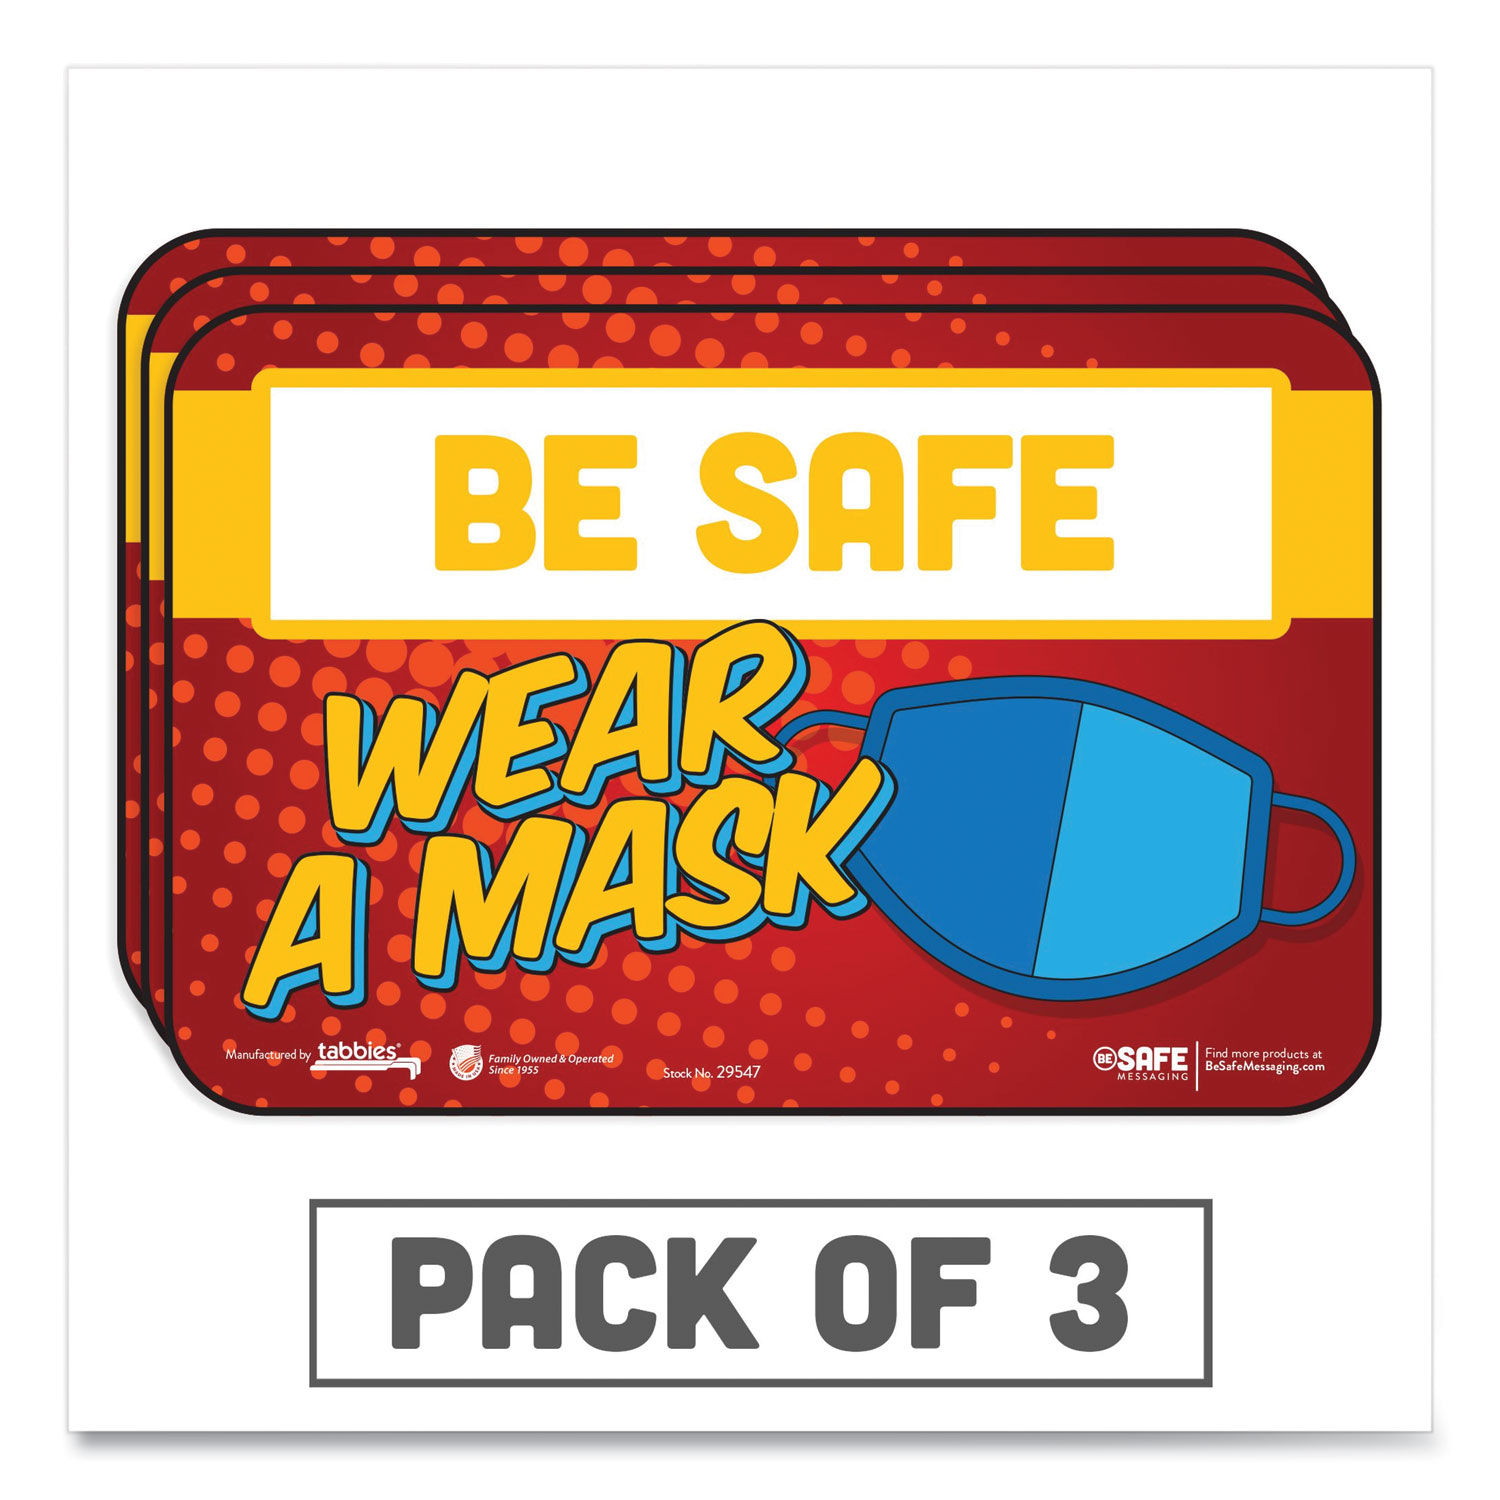 BeSafe Messaging Education Wall Signs 9 x 6,  "Be Safe, Wear A Mask", 3/Pack